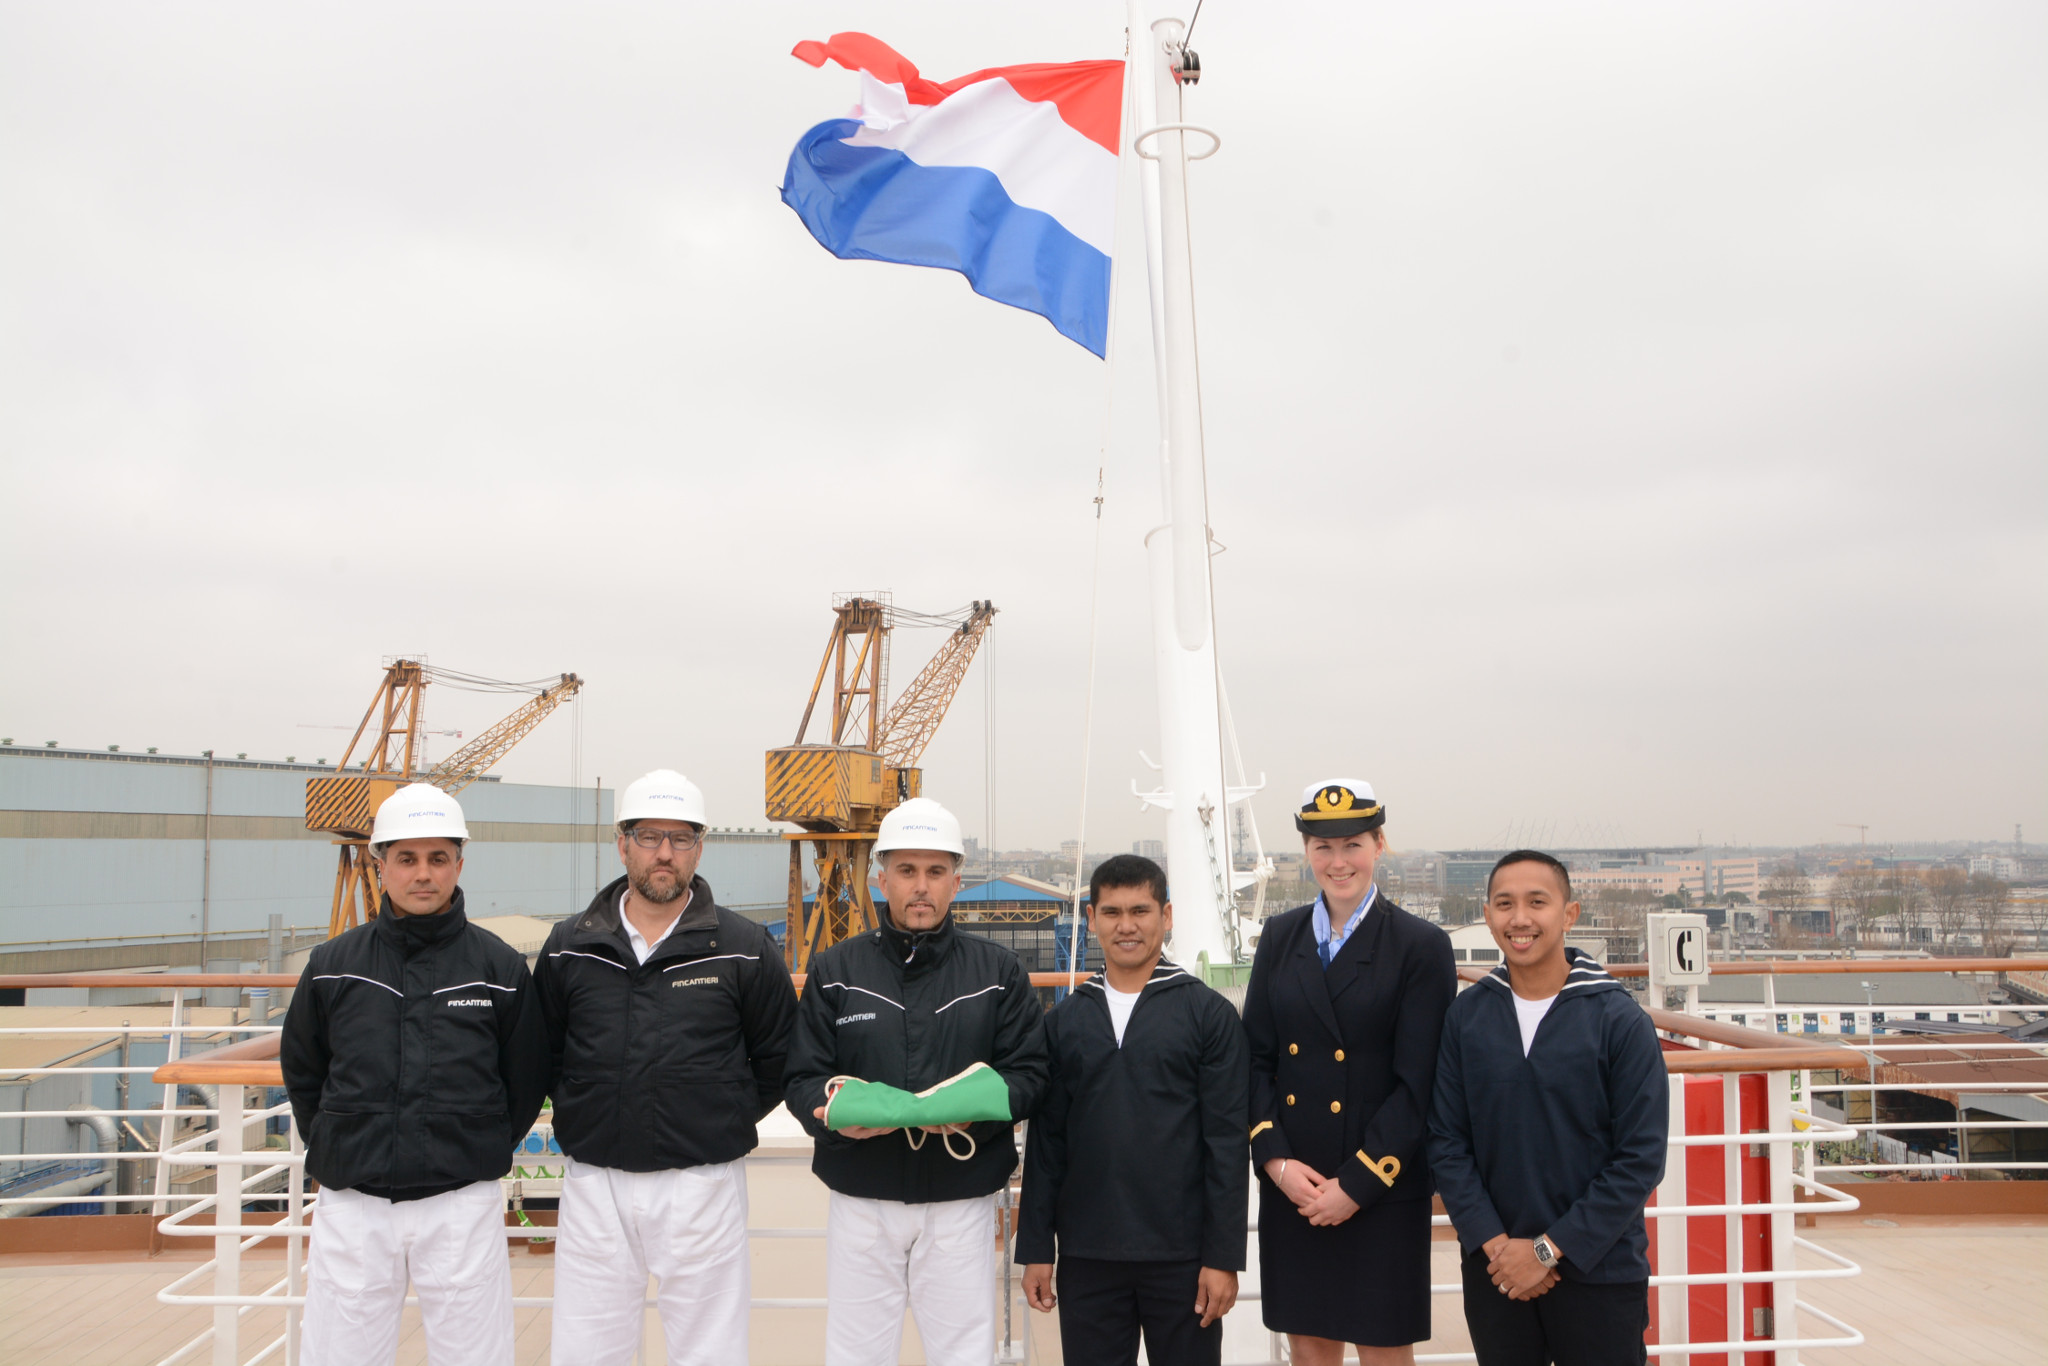 Holland America Line Takes Delivery of ms Koningsdam from Fincantieri Shipyard